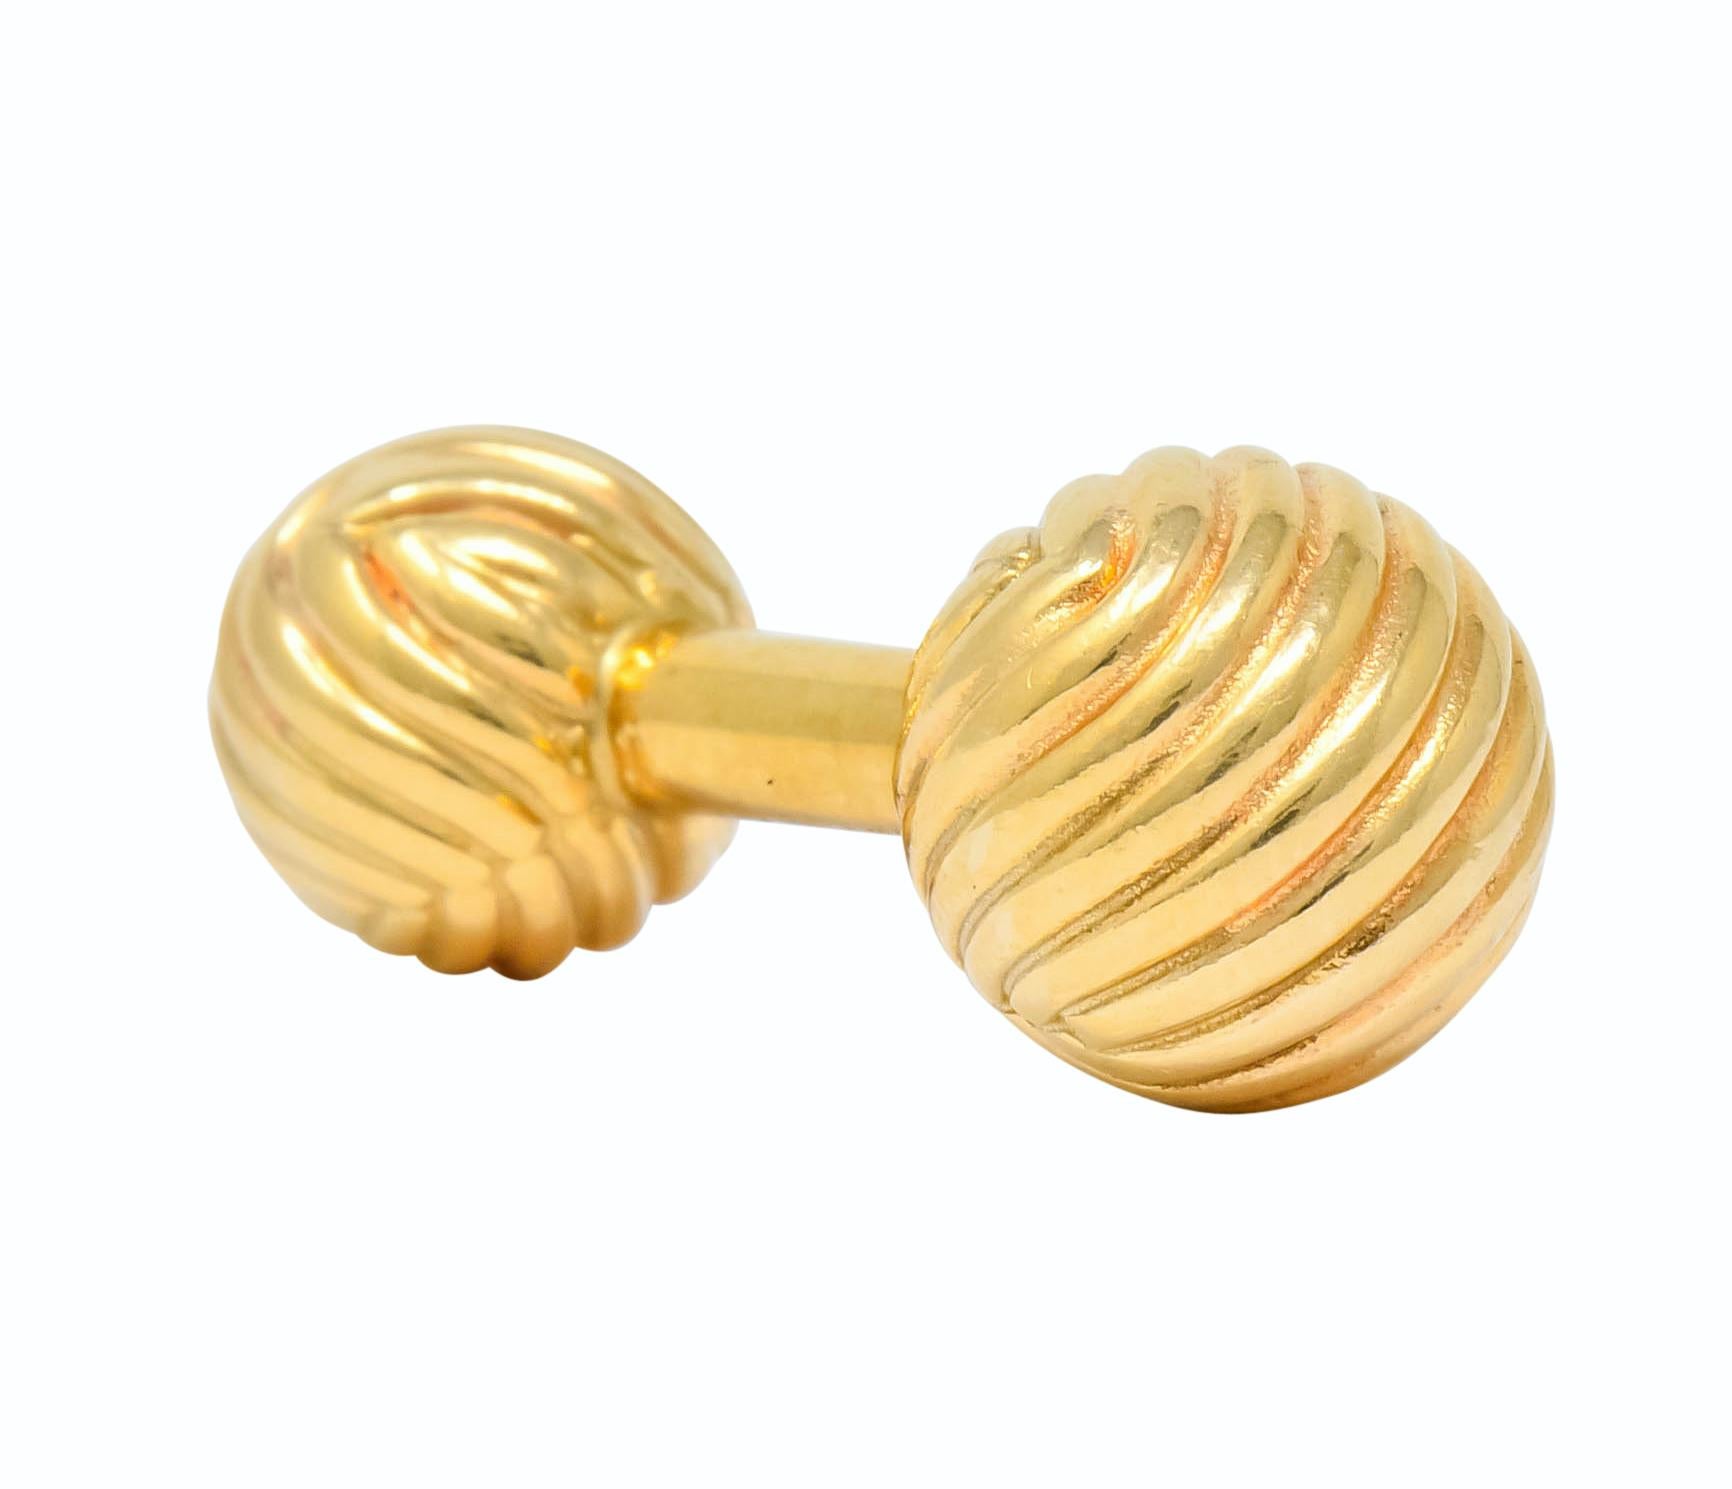 Bar style cufflinks with a ball on each end, one small and one large, deeply ridged with a grooved texture

Larger ball measuring 11.0 mm and smaller ball measuring 9.7 mm

Central bar fully signed Tiffany & Co.

Stamped 14kt for 14 karat